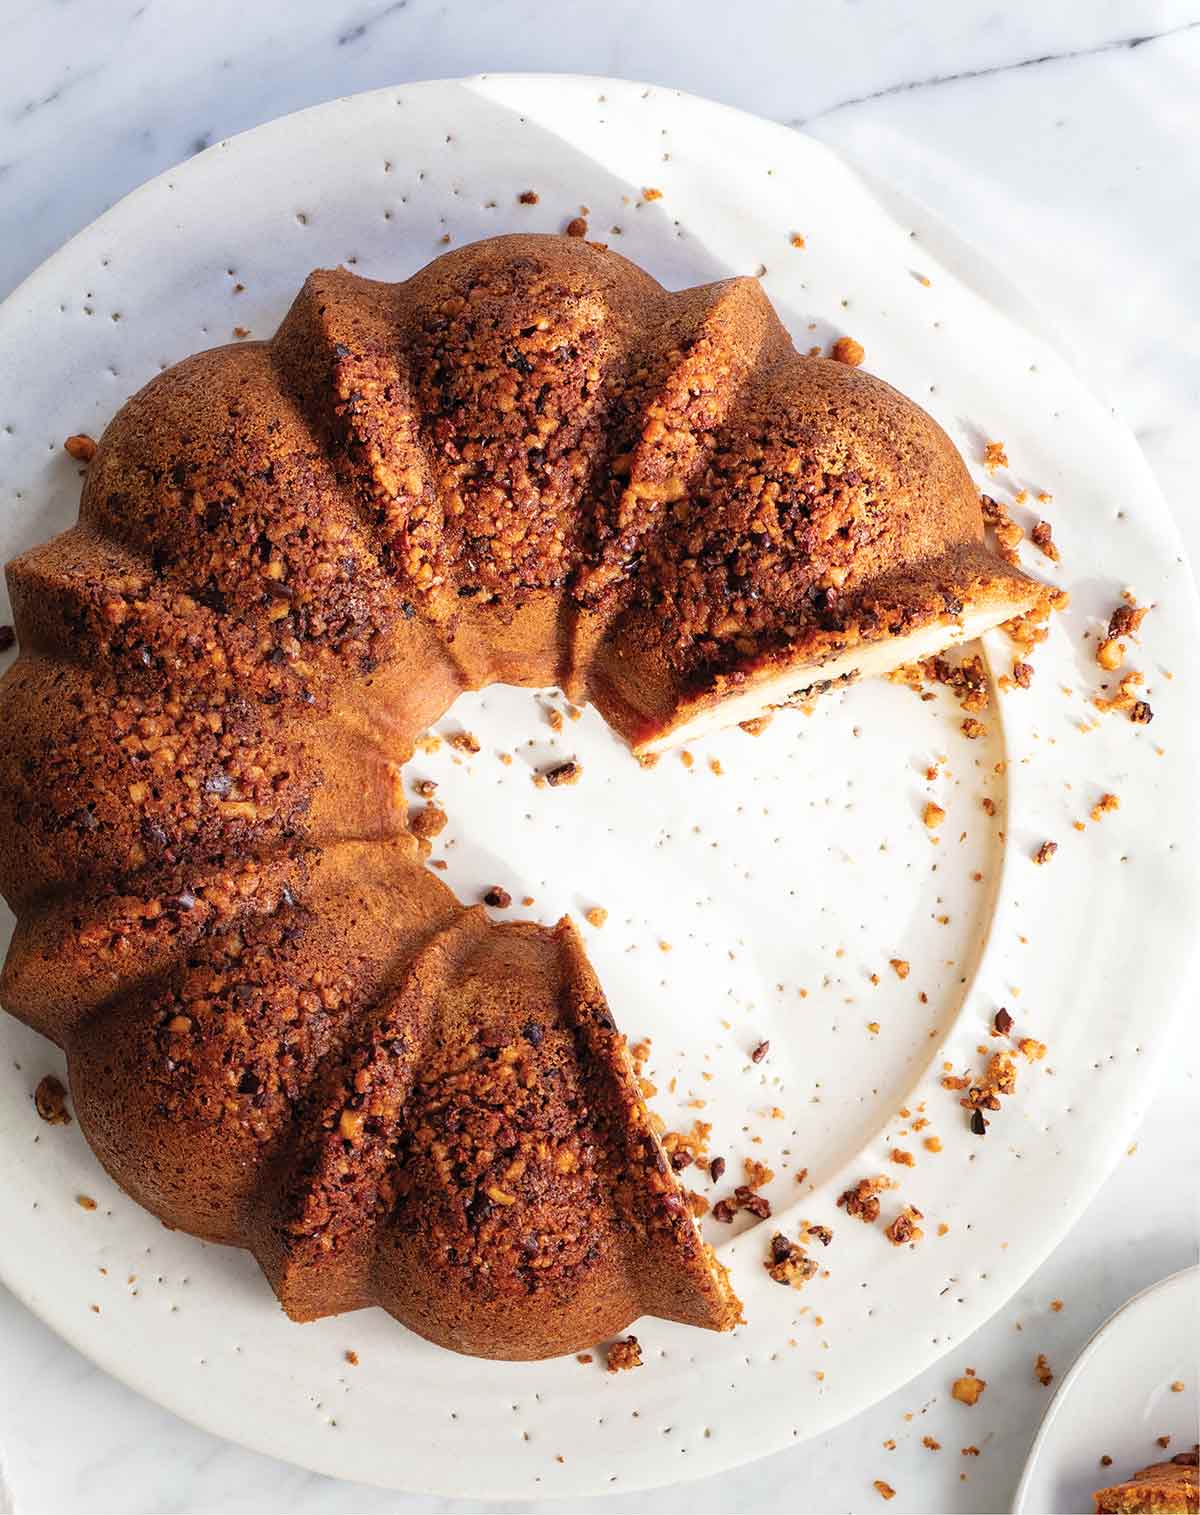 A Bundt-shaped walnut coffee cake with cacao nibs on a white platter with several slices missing.